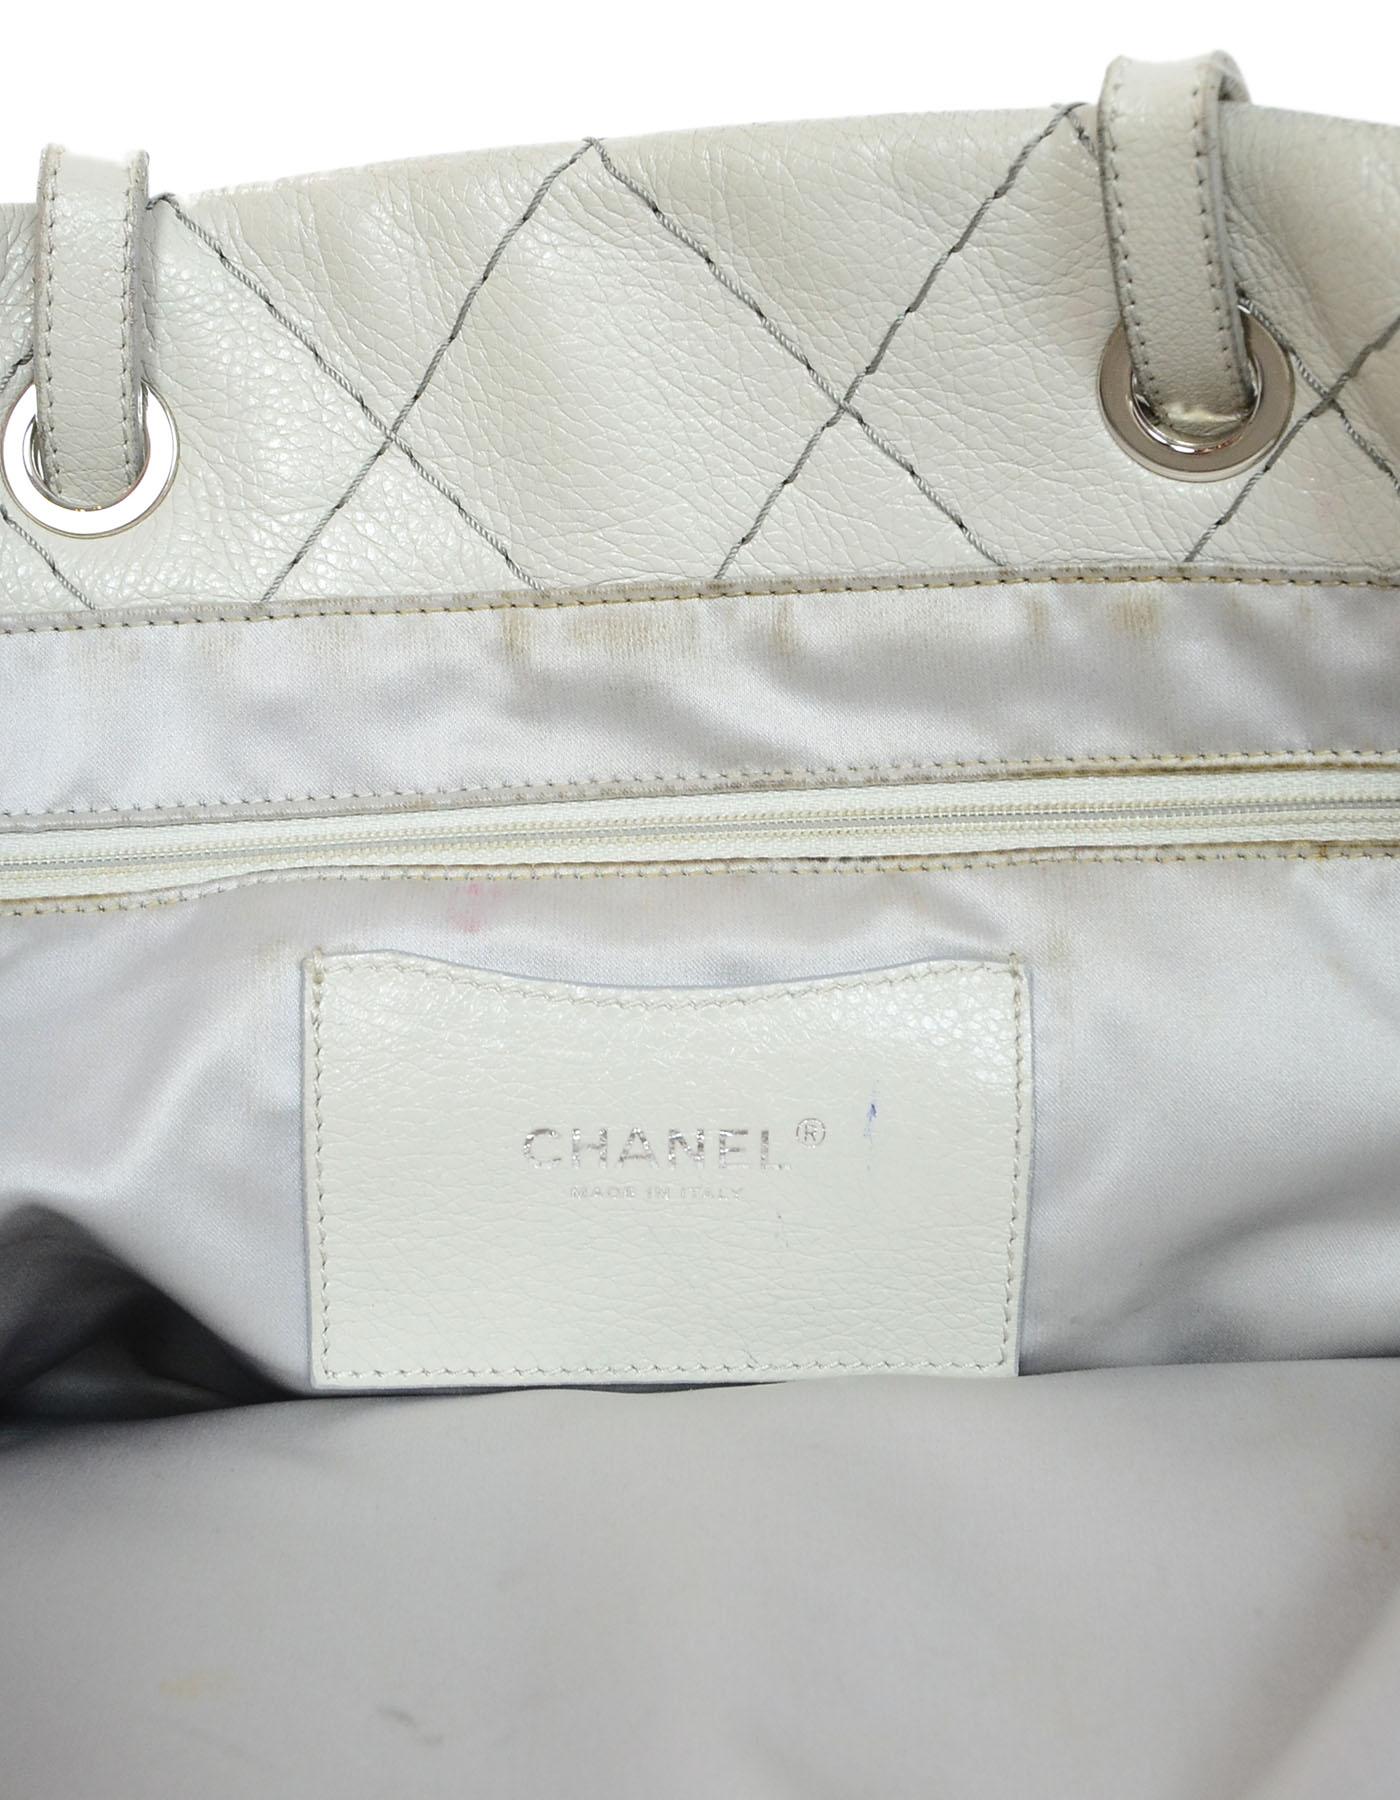 Chanel Off-White Glazed Calfskin Large On The Road Tote Bag 3